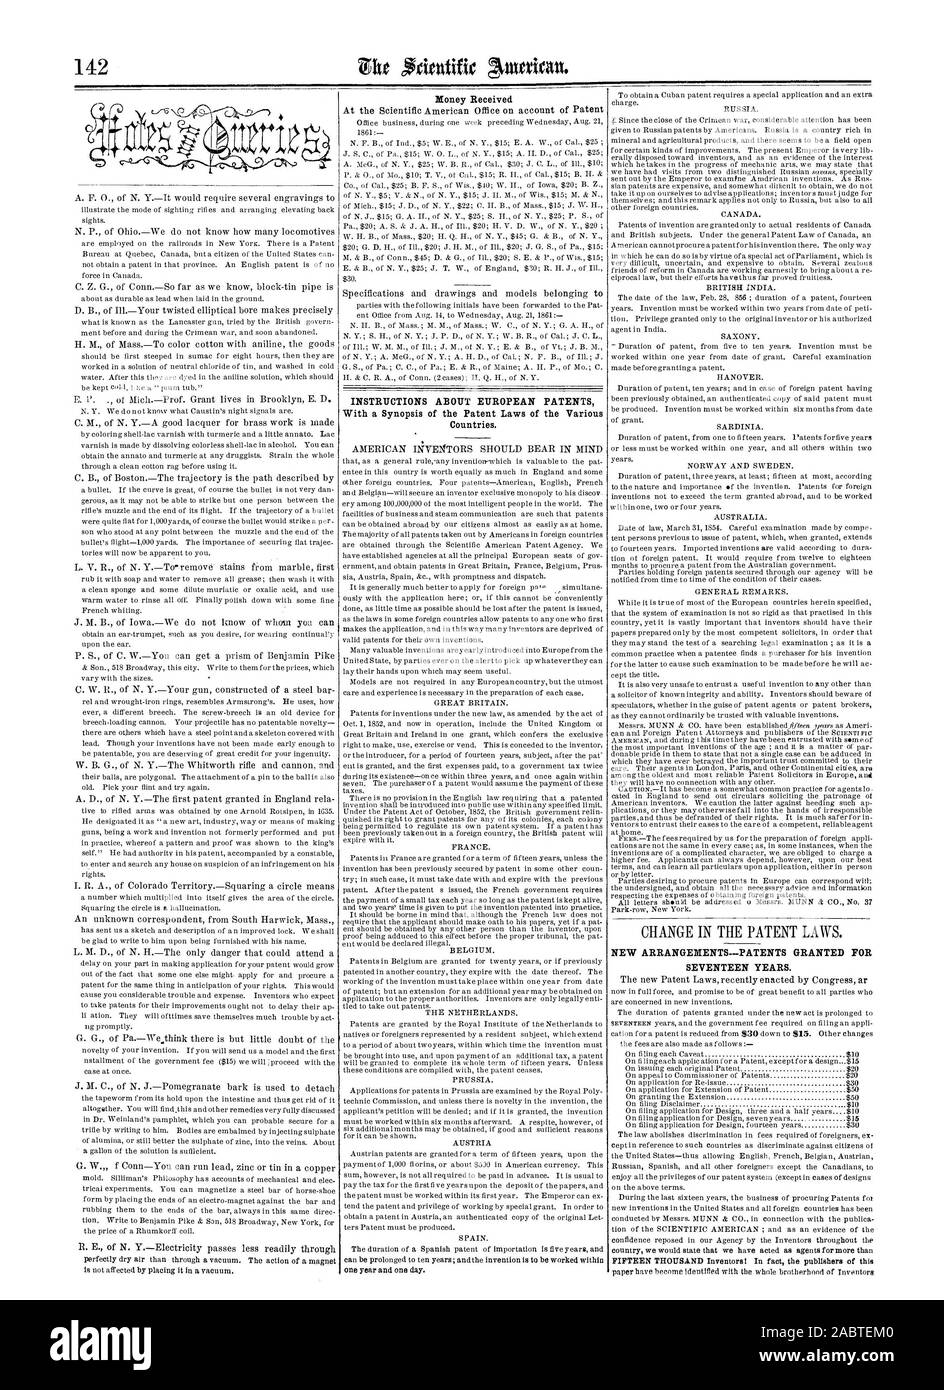 Money Received INSTRUCTIONS ABOUT EUROPEAN PATENTS With a Synopsis of the Patent Laws of the Various Countries. NEW ARRANGEMENTSPATENTS GRANTED FOR SEVENTEEN YEARS., scientific american, 1861-08-31 Stock Photo